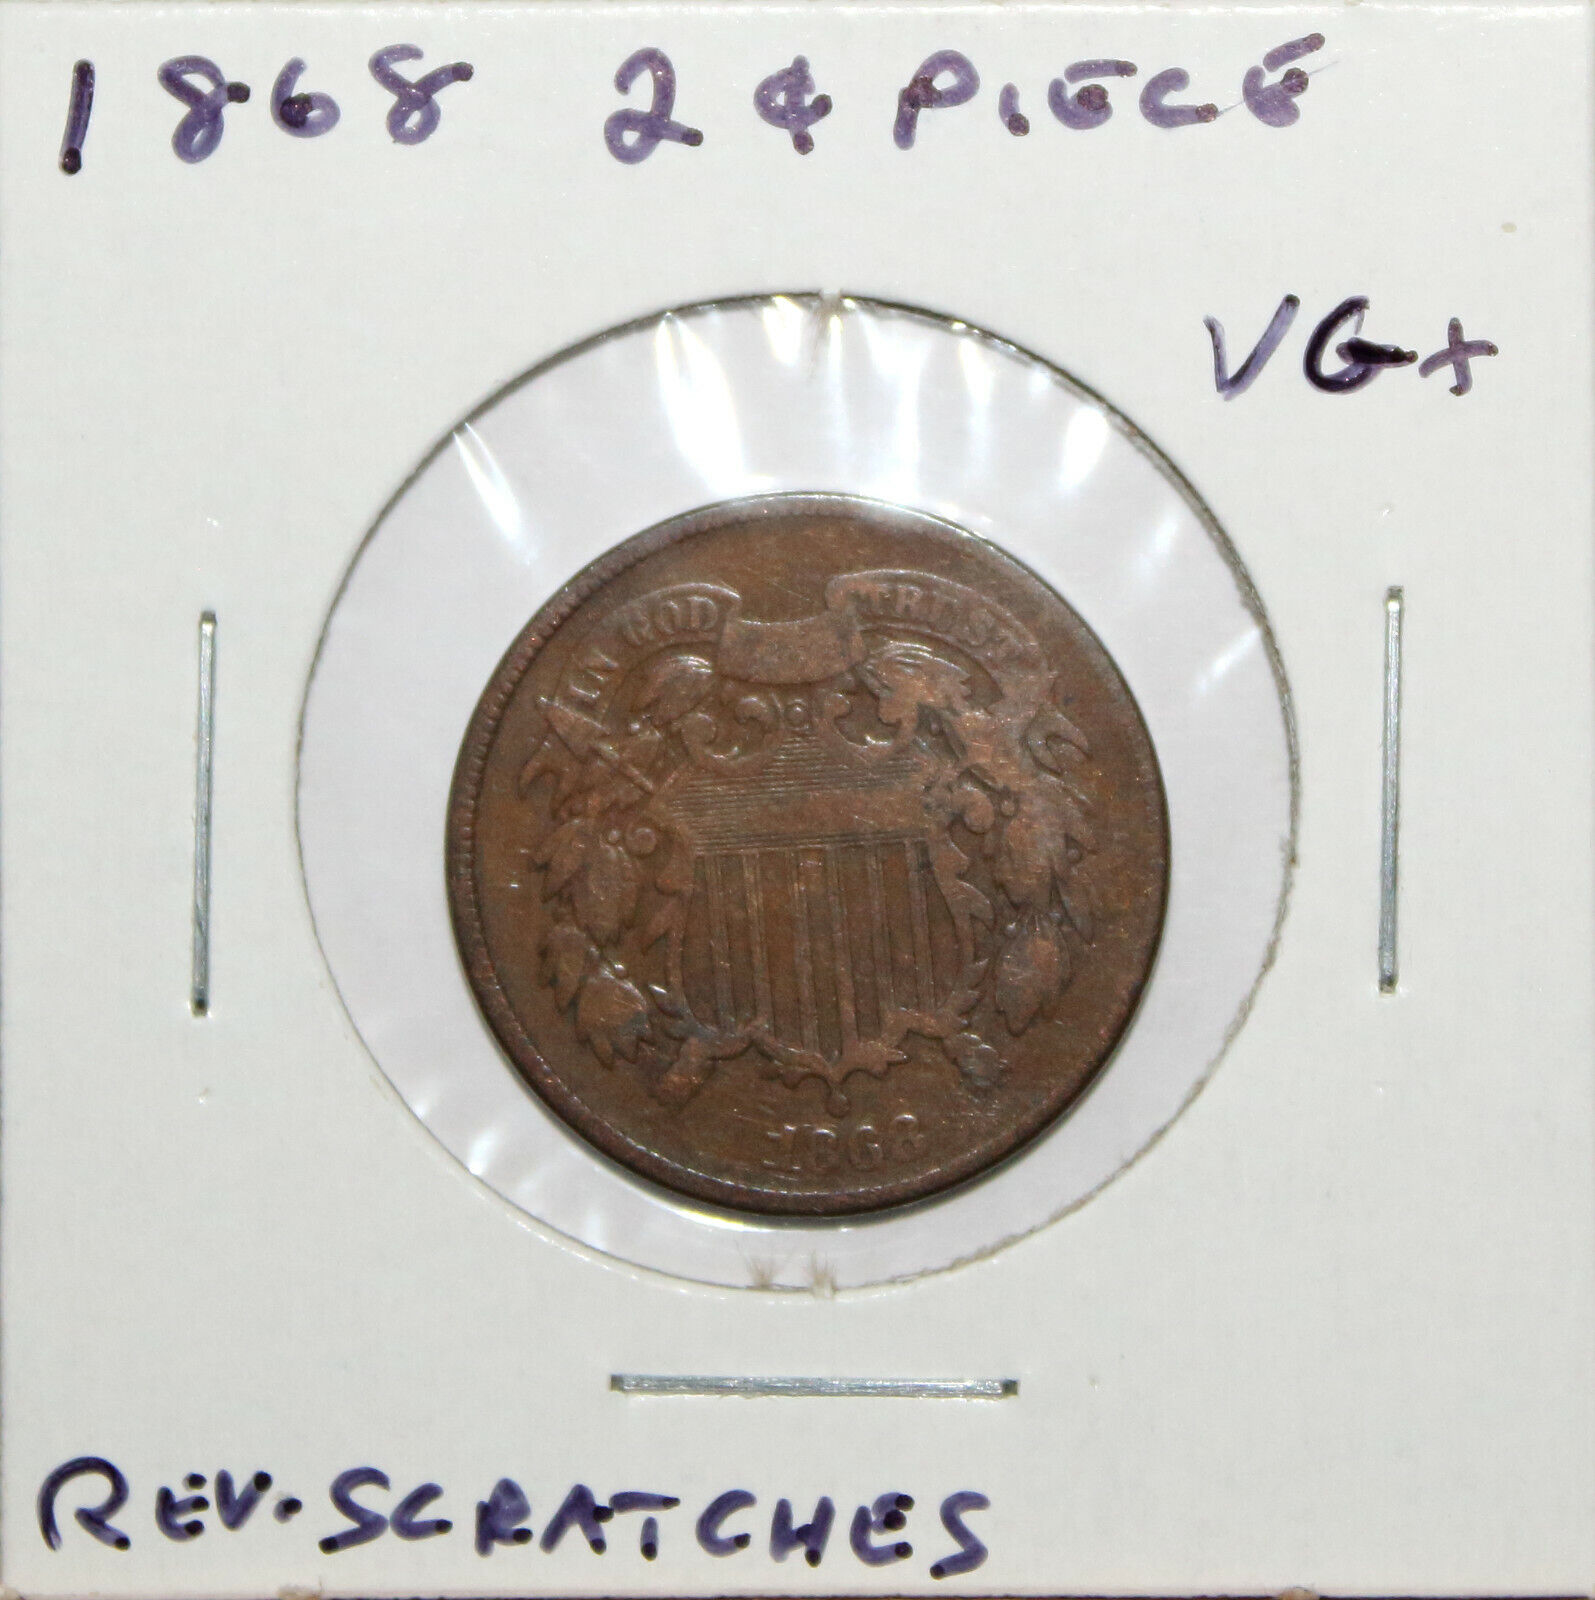 1868 US 2c New Free Shipping Two Cent Piece San Jose Mall Details VG Good fs Very